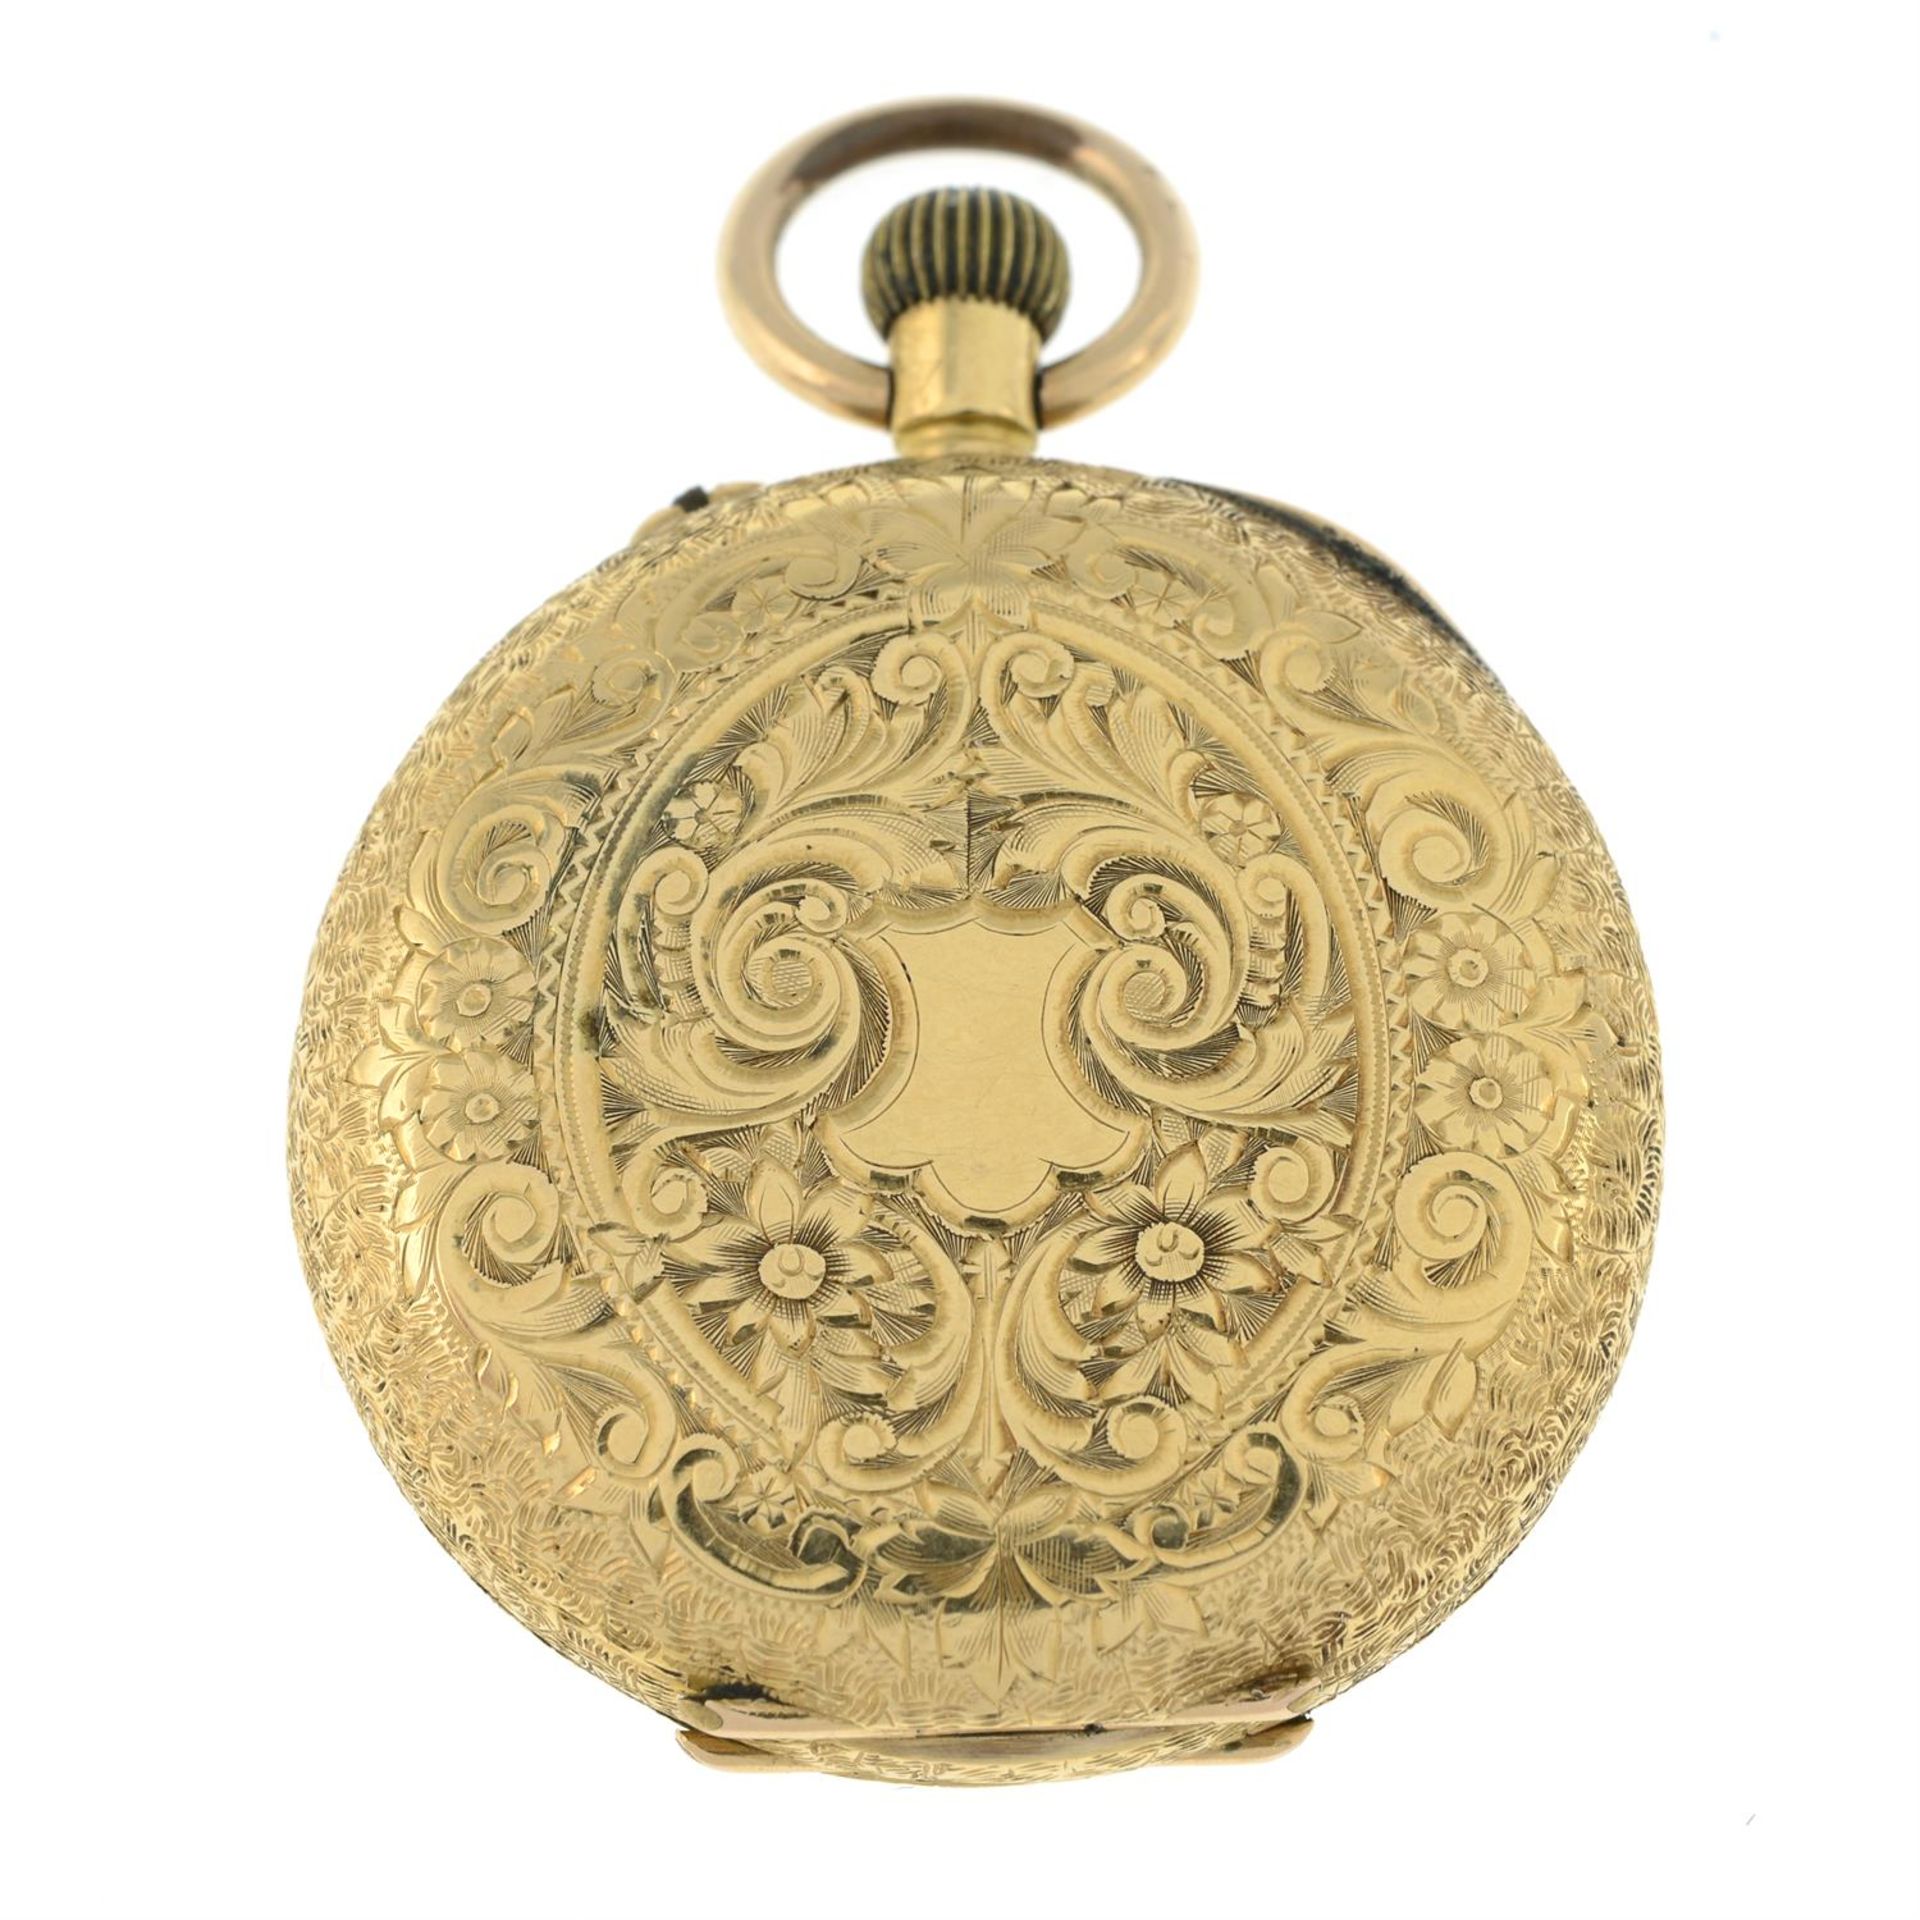 A late Victorian 18ct gold pocket watch, with floral engraving. - Image 2 of 2